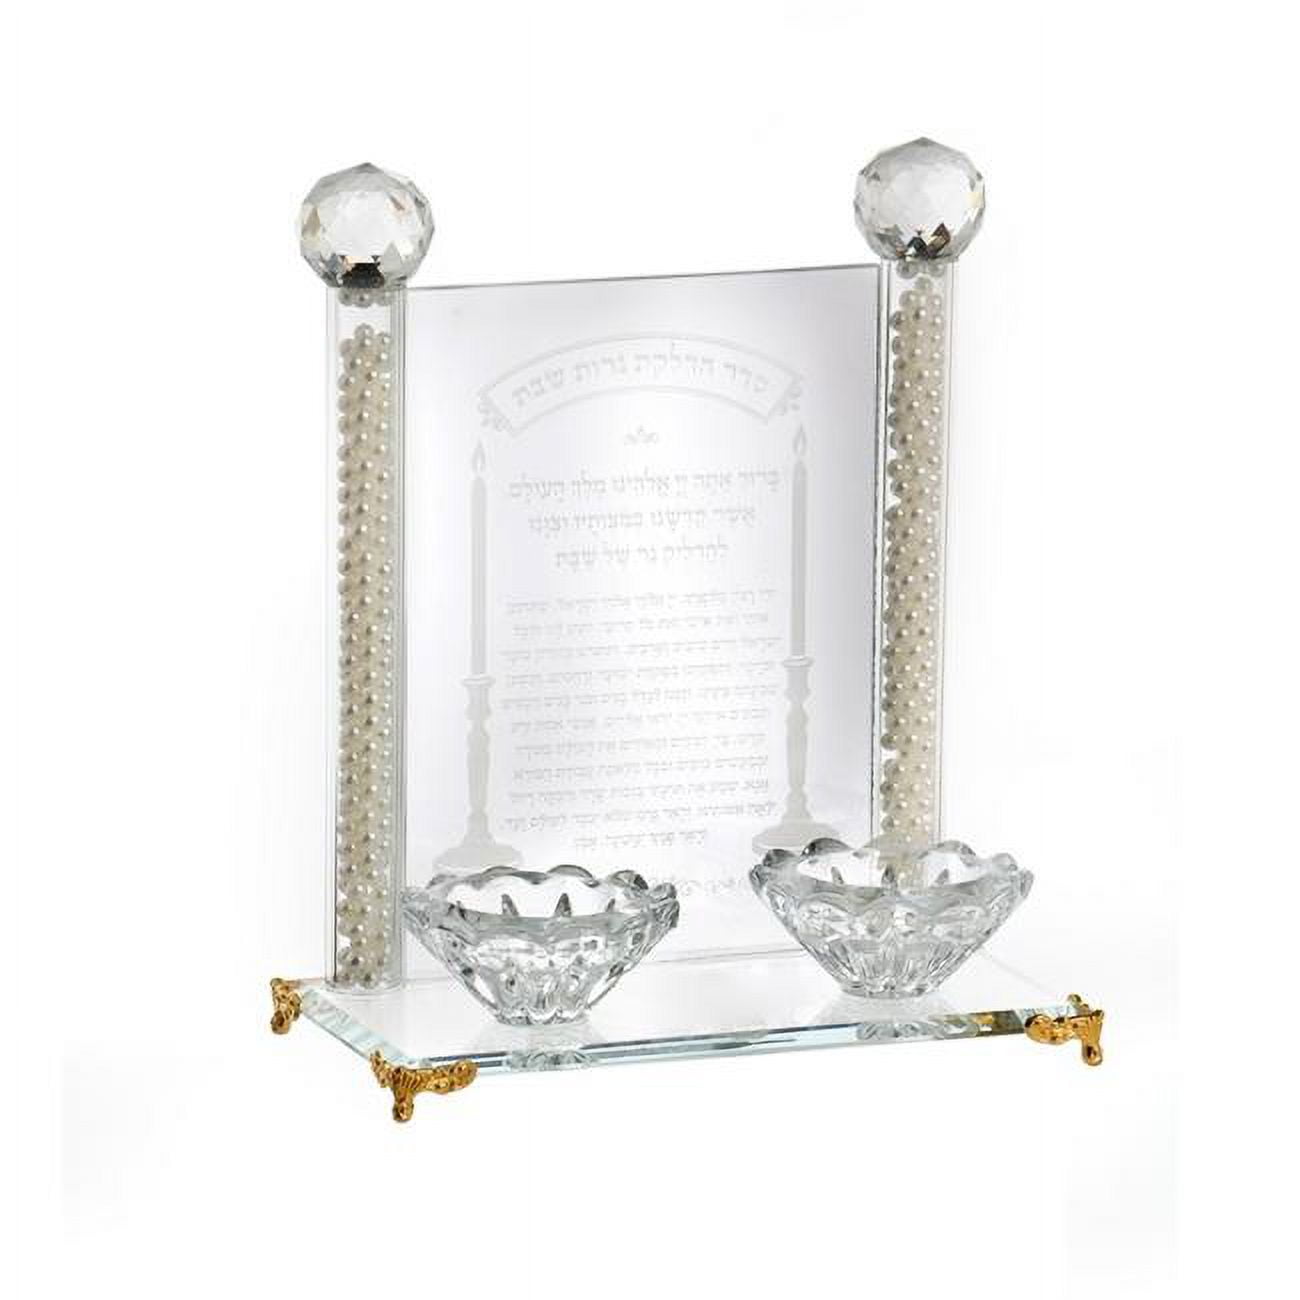 Picture of Novell Collection X2443Z Crystal Candlesticks on Mirror Tray with Gold Legs